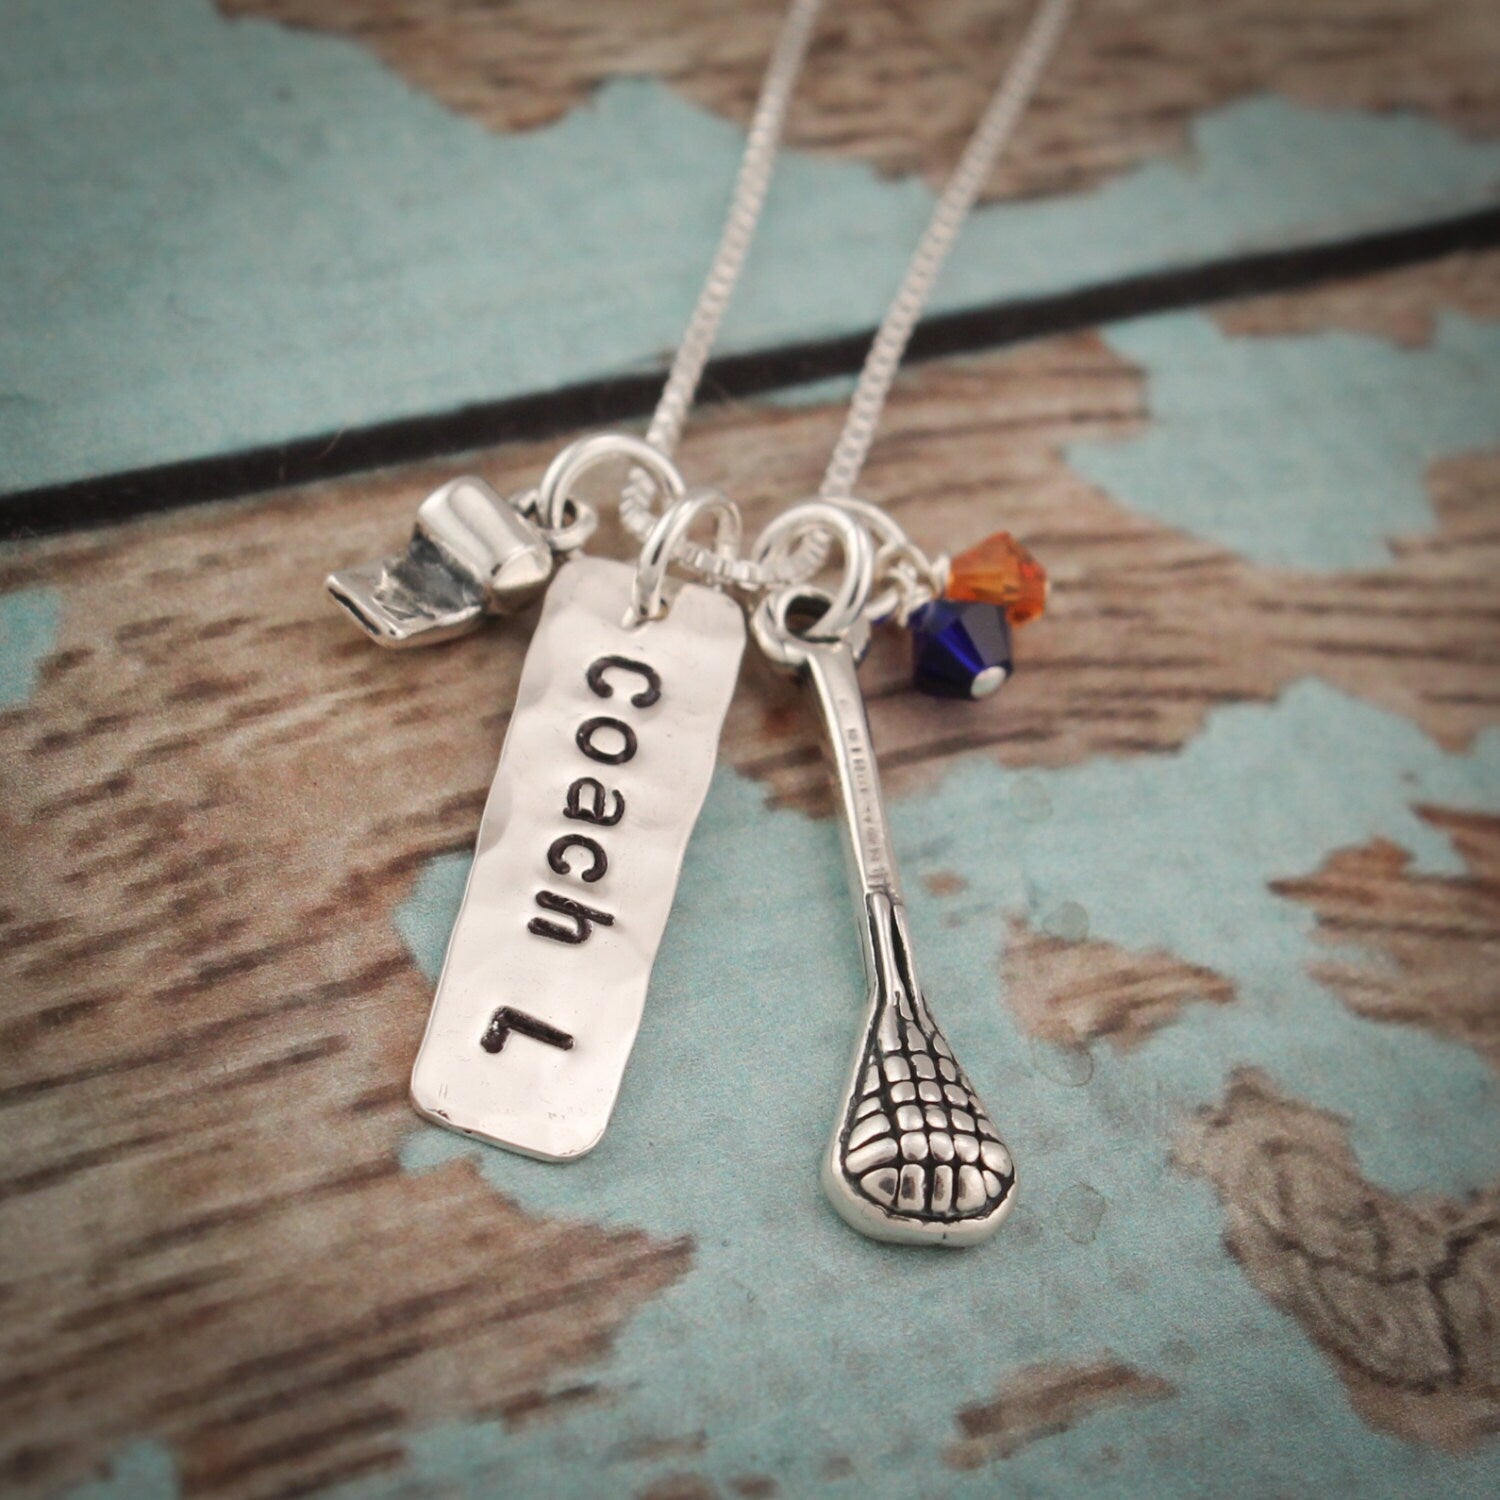 Coach Necklace Sterling Silver Coach Gift  Lacrosse -  Field Hockey - Soccer - Basketball Jewelry Customized Personalized Hand Stamped